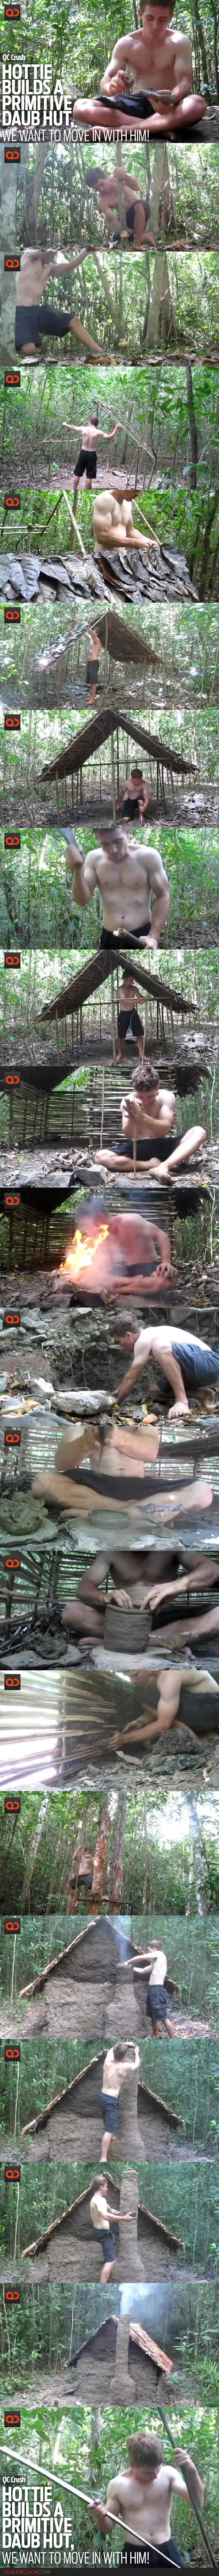 Hottie Builds A Primitive Daub Hut, We Want To Move In With Him!